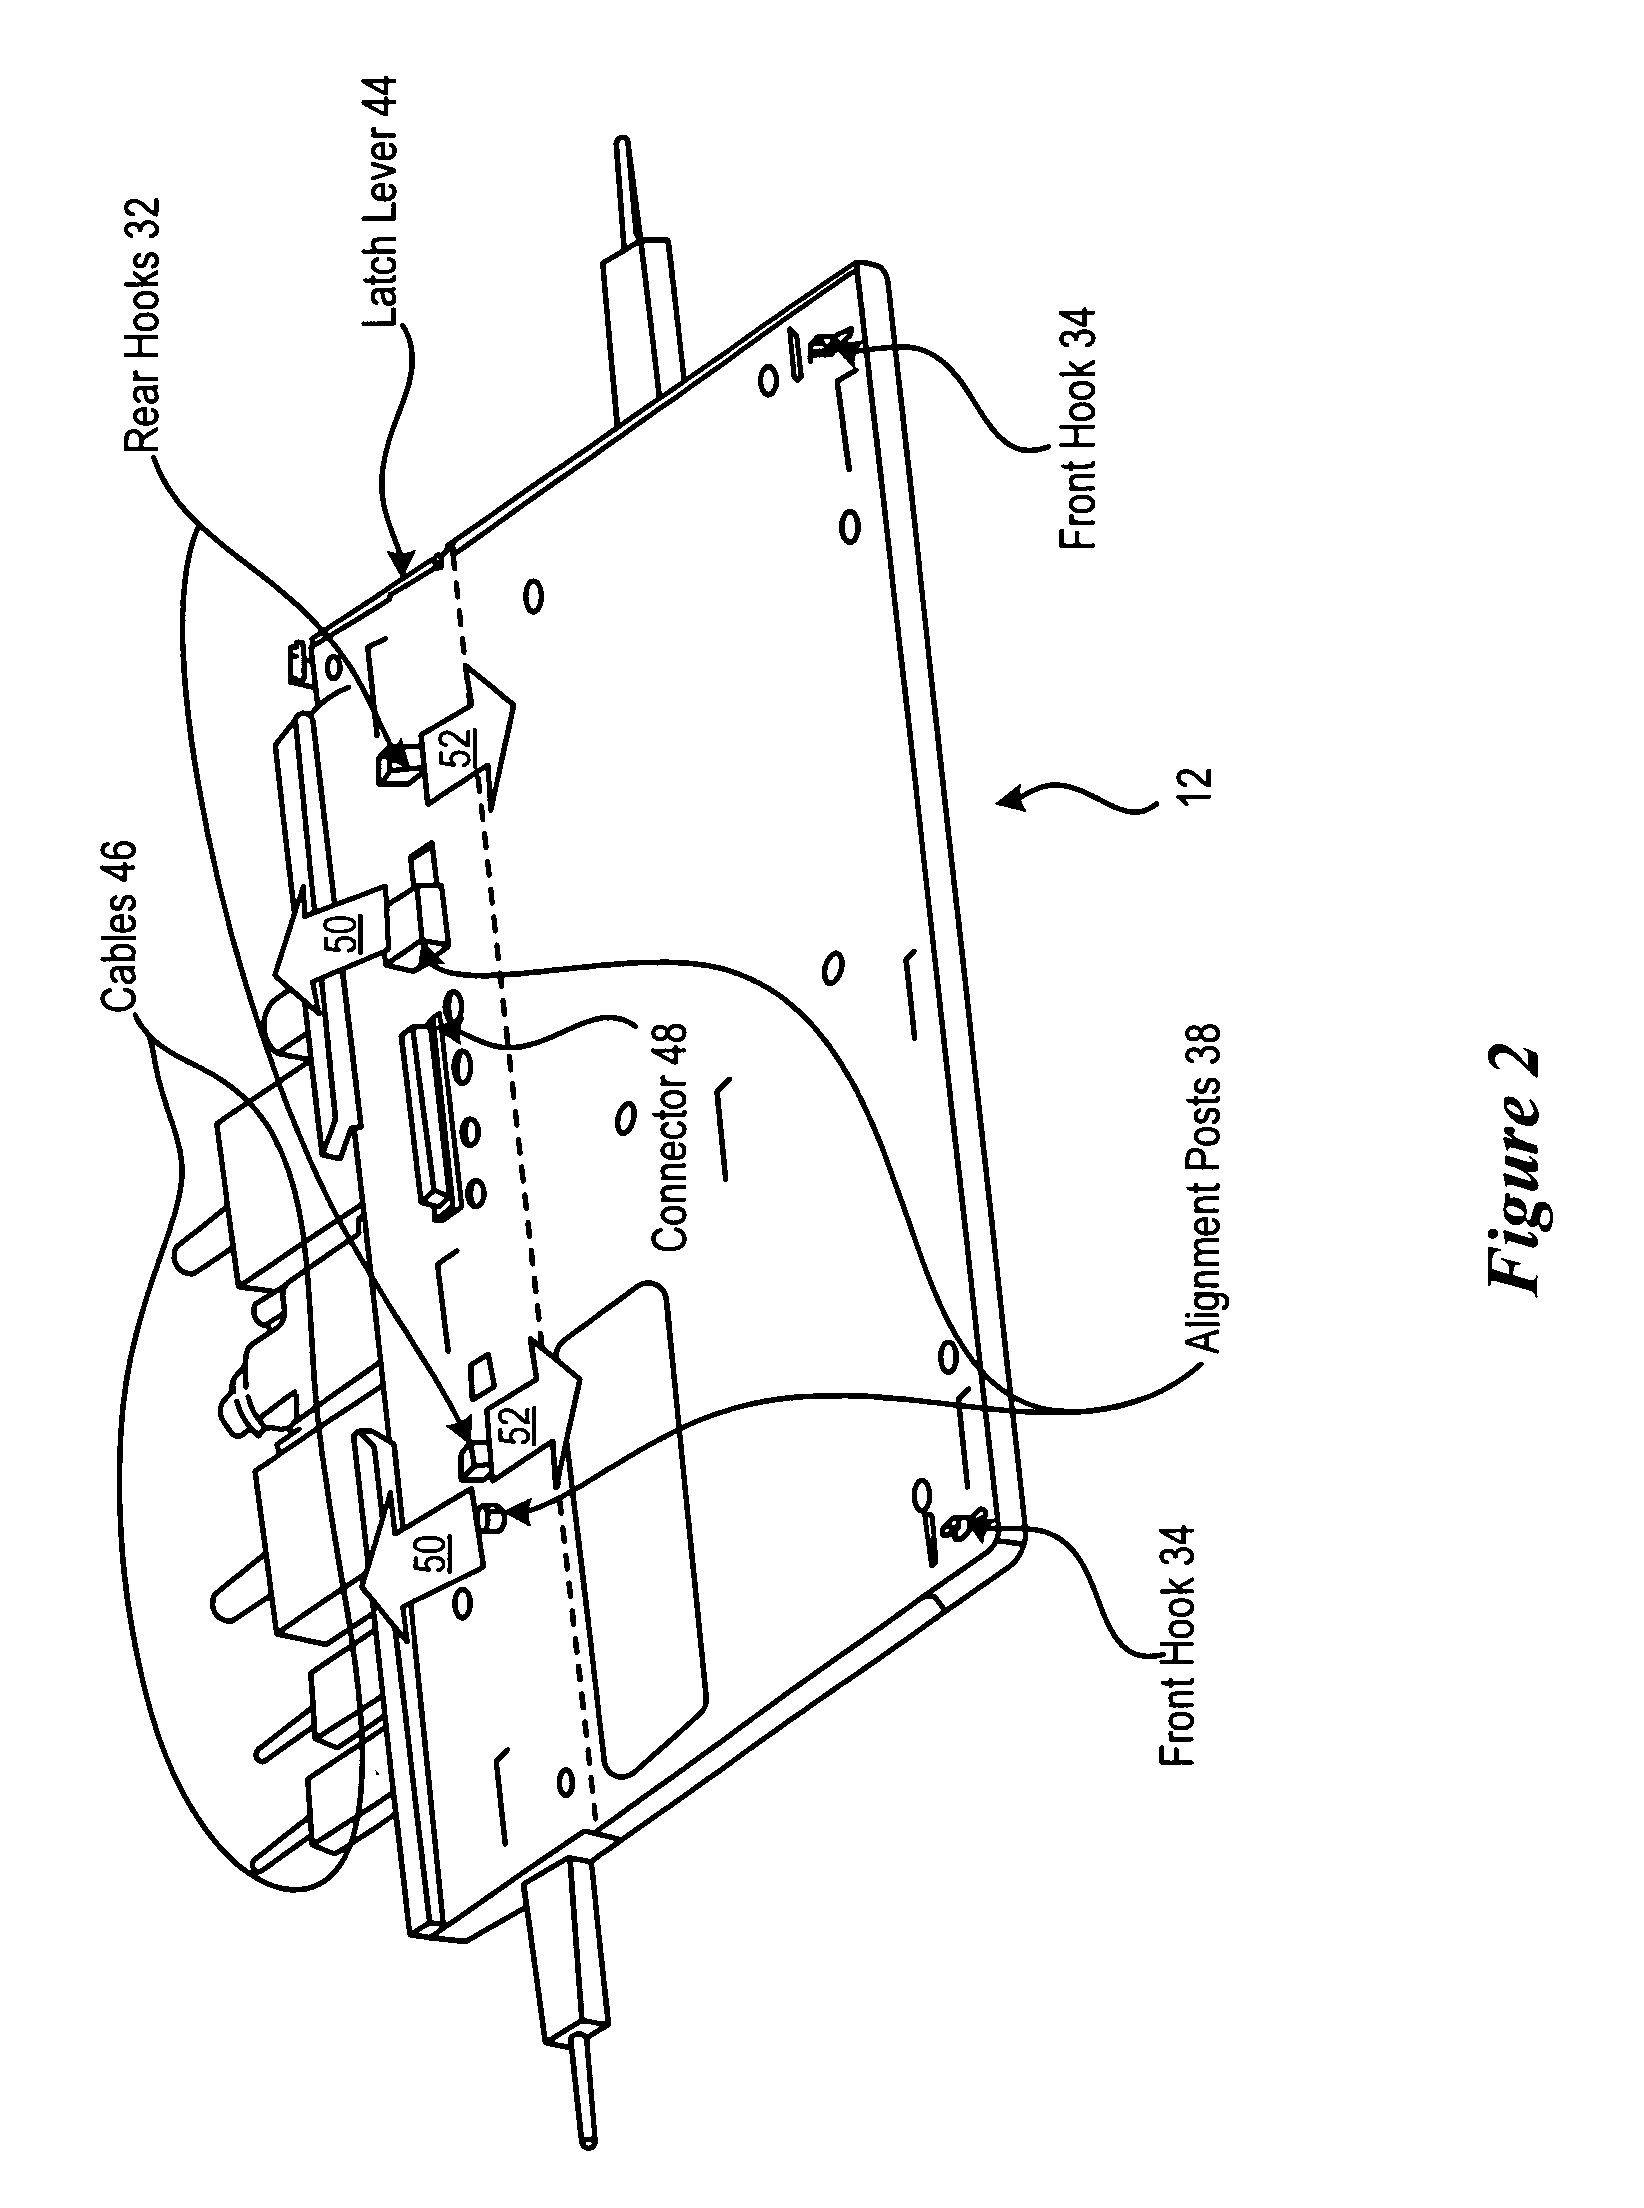 System and method for releasing a peripheral slice from an information handling system